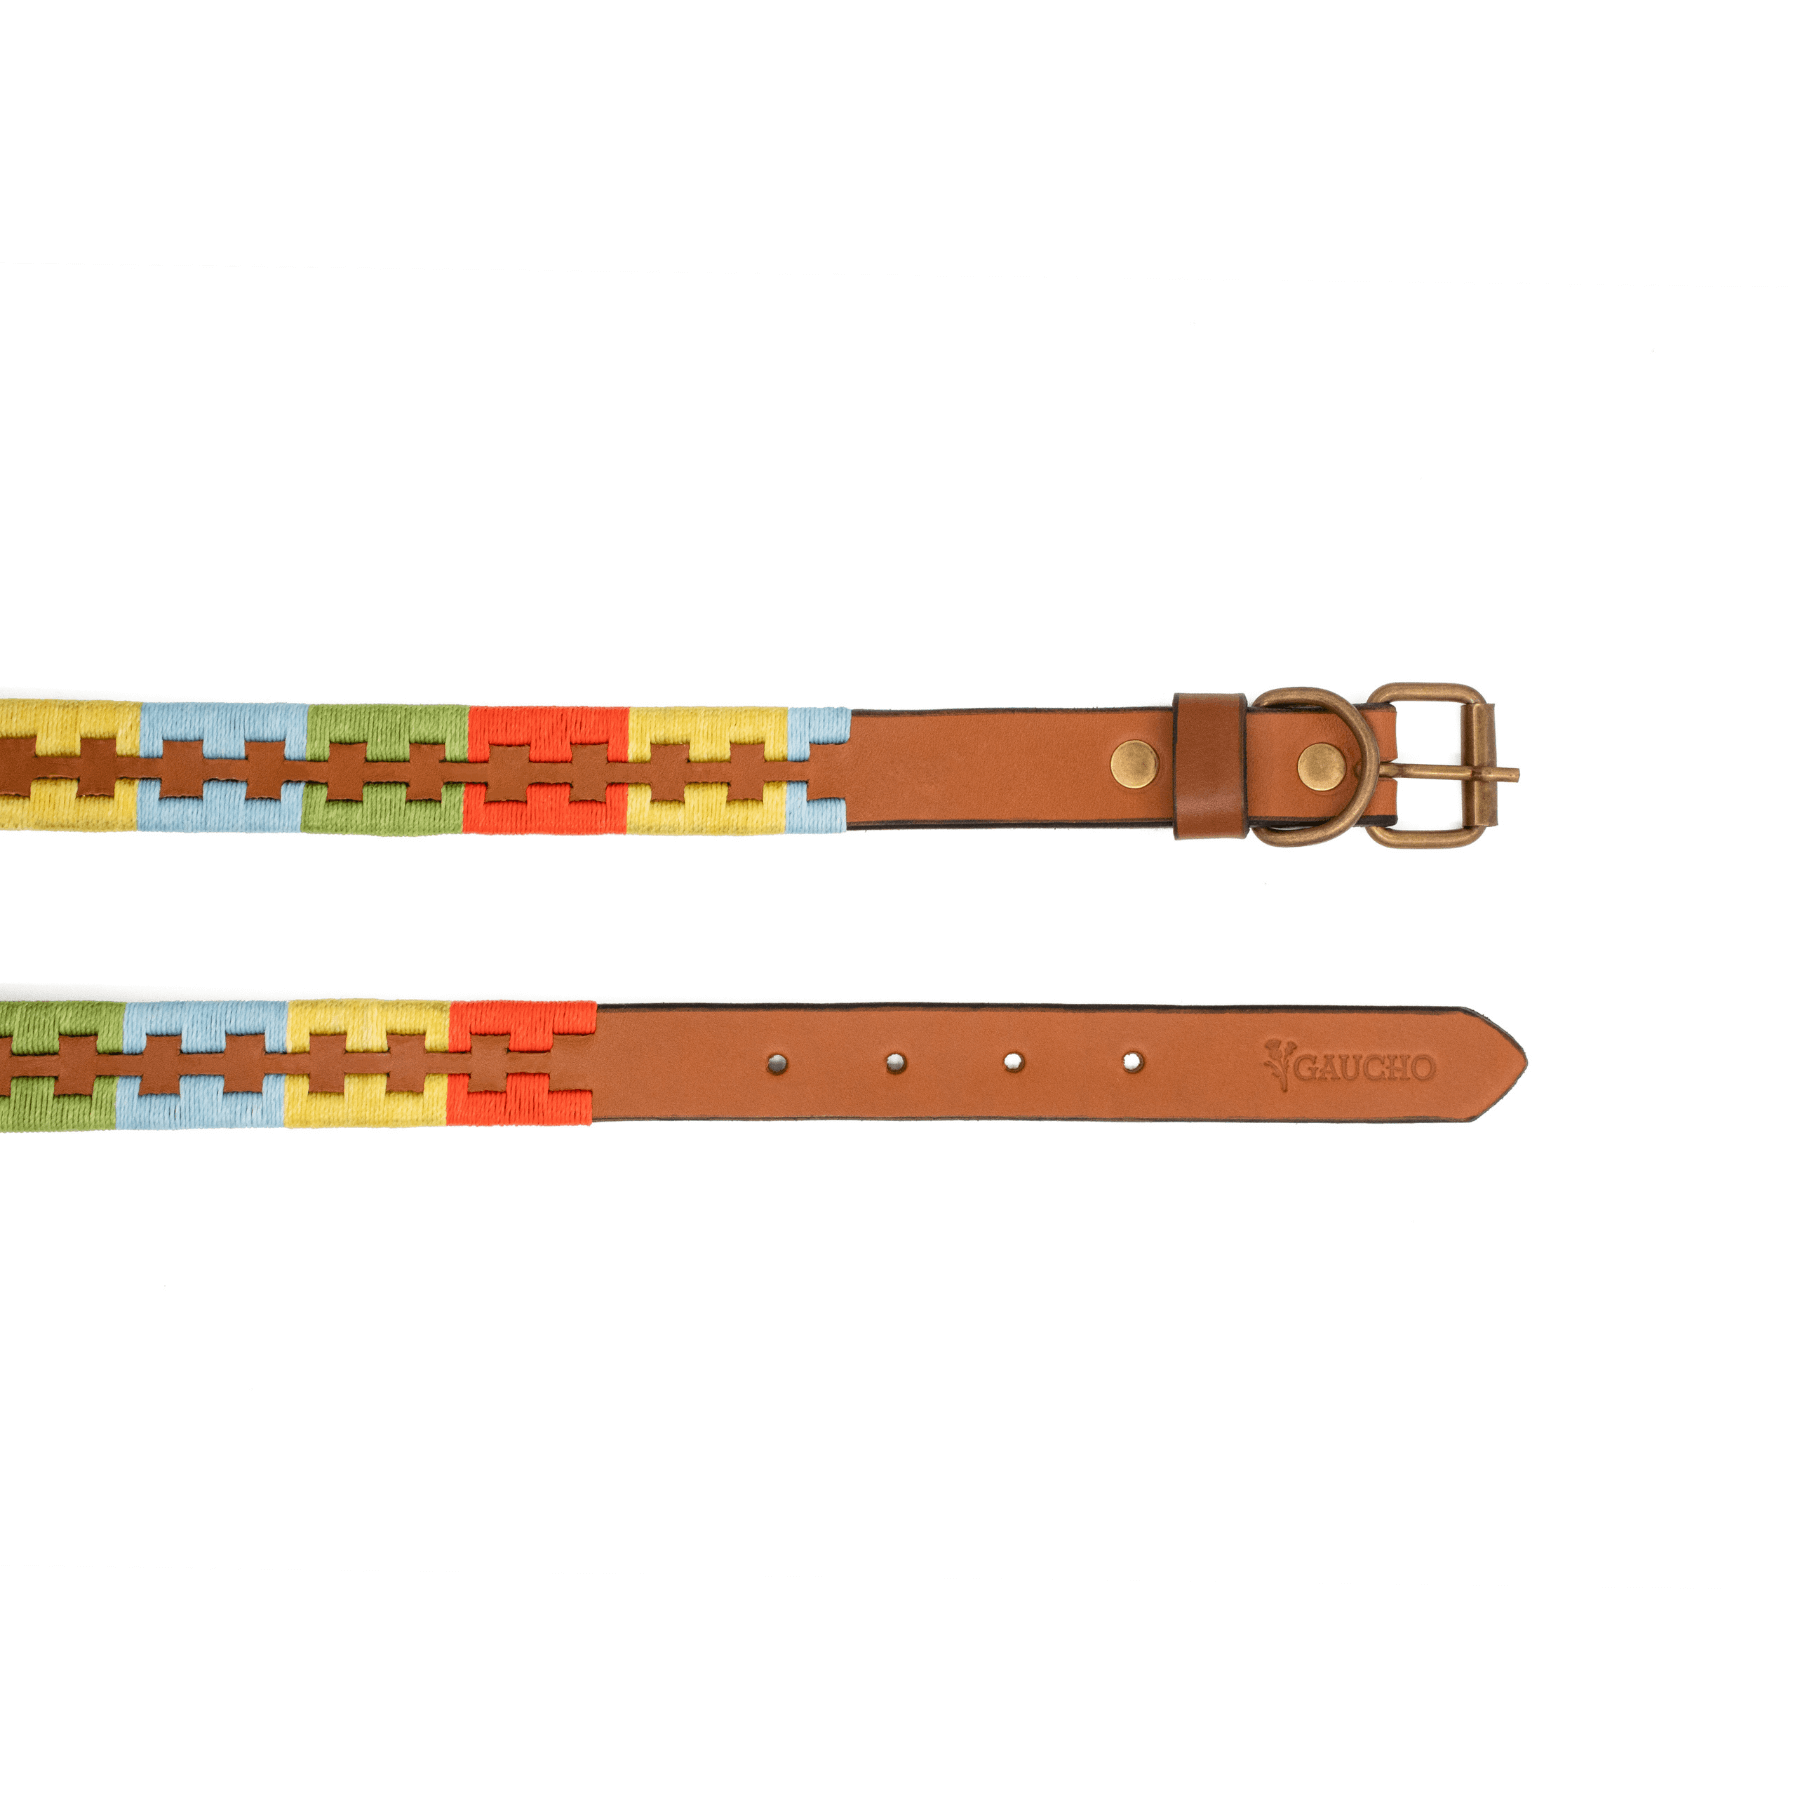 Gaucholife Dogs Embroidered Leather Dog Collar (Summer)